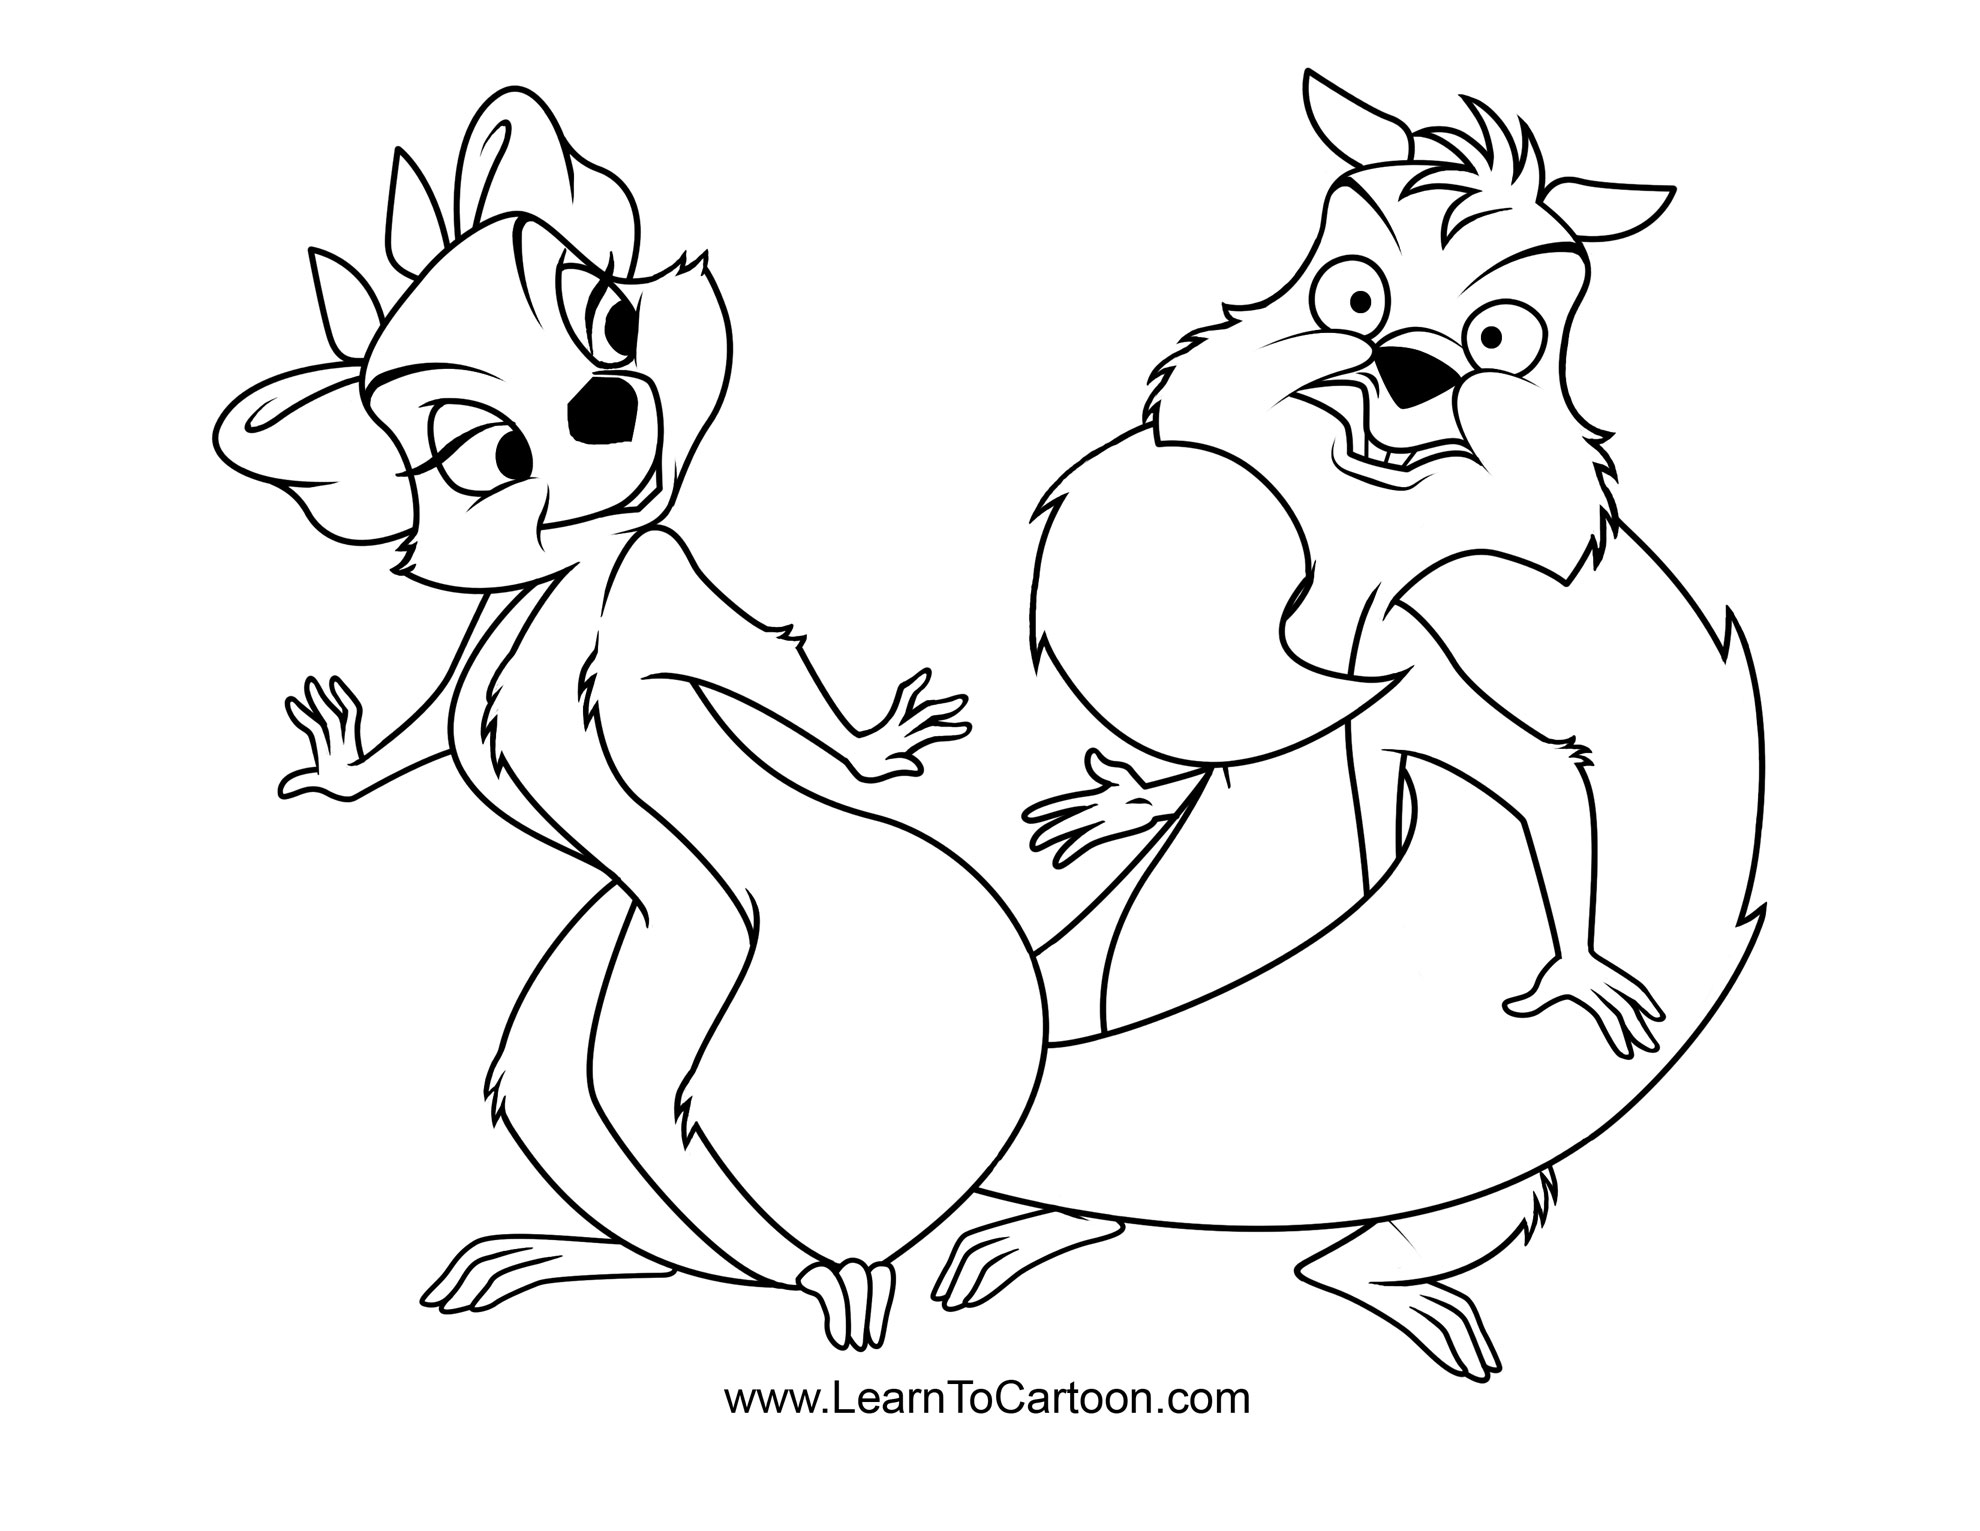 Learn To Cartoon Coloring Page
